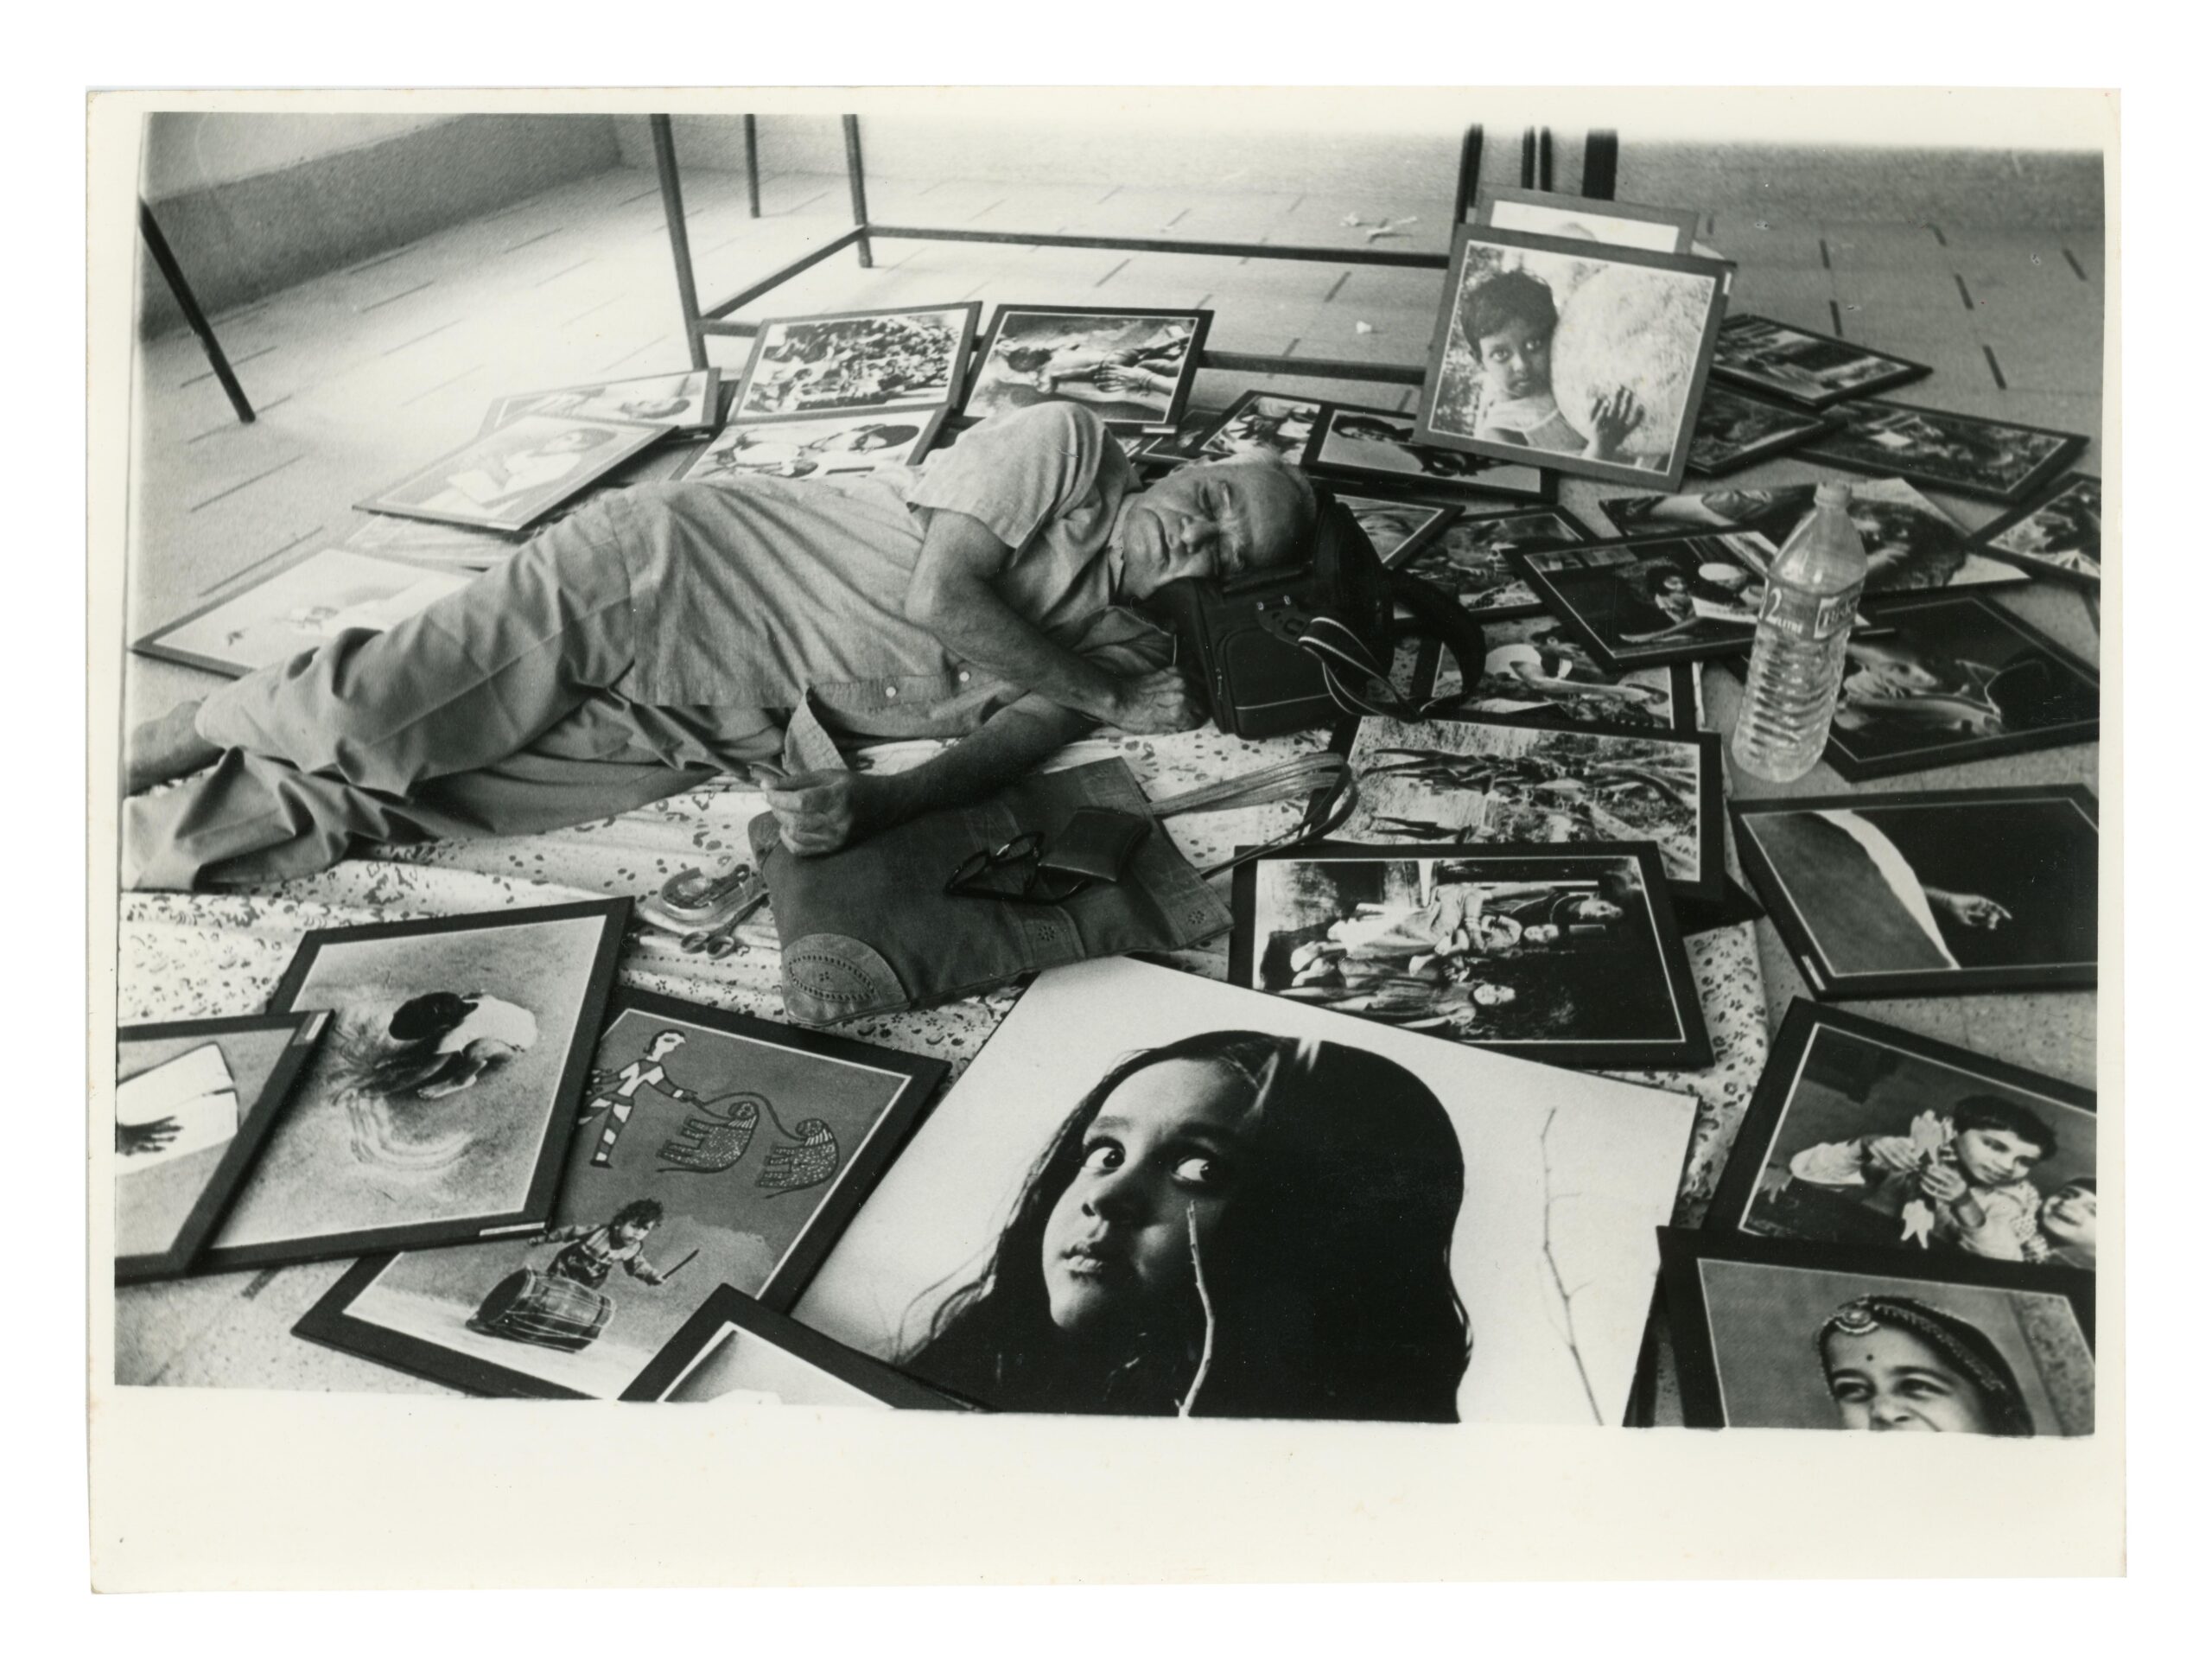 Photographer TS Satyan Sleeping Amidst his Exhibition Photographs Unknown 1999 Mysore (now Mysuru), Karnataka, India Silver gelatin print PHY.10348 Gifted by the TS Satyan Family Trust (Museum of Art & Photography, Bengaluru)